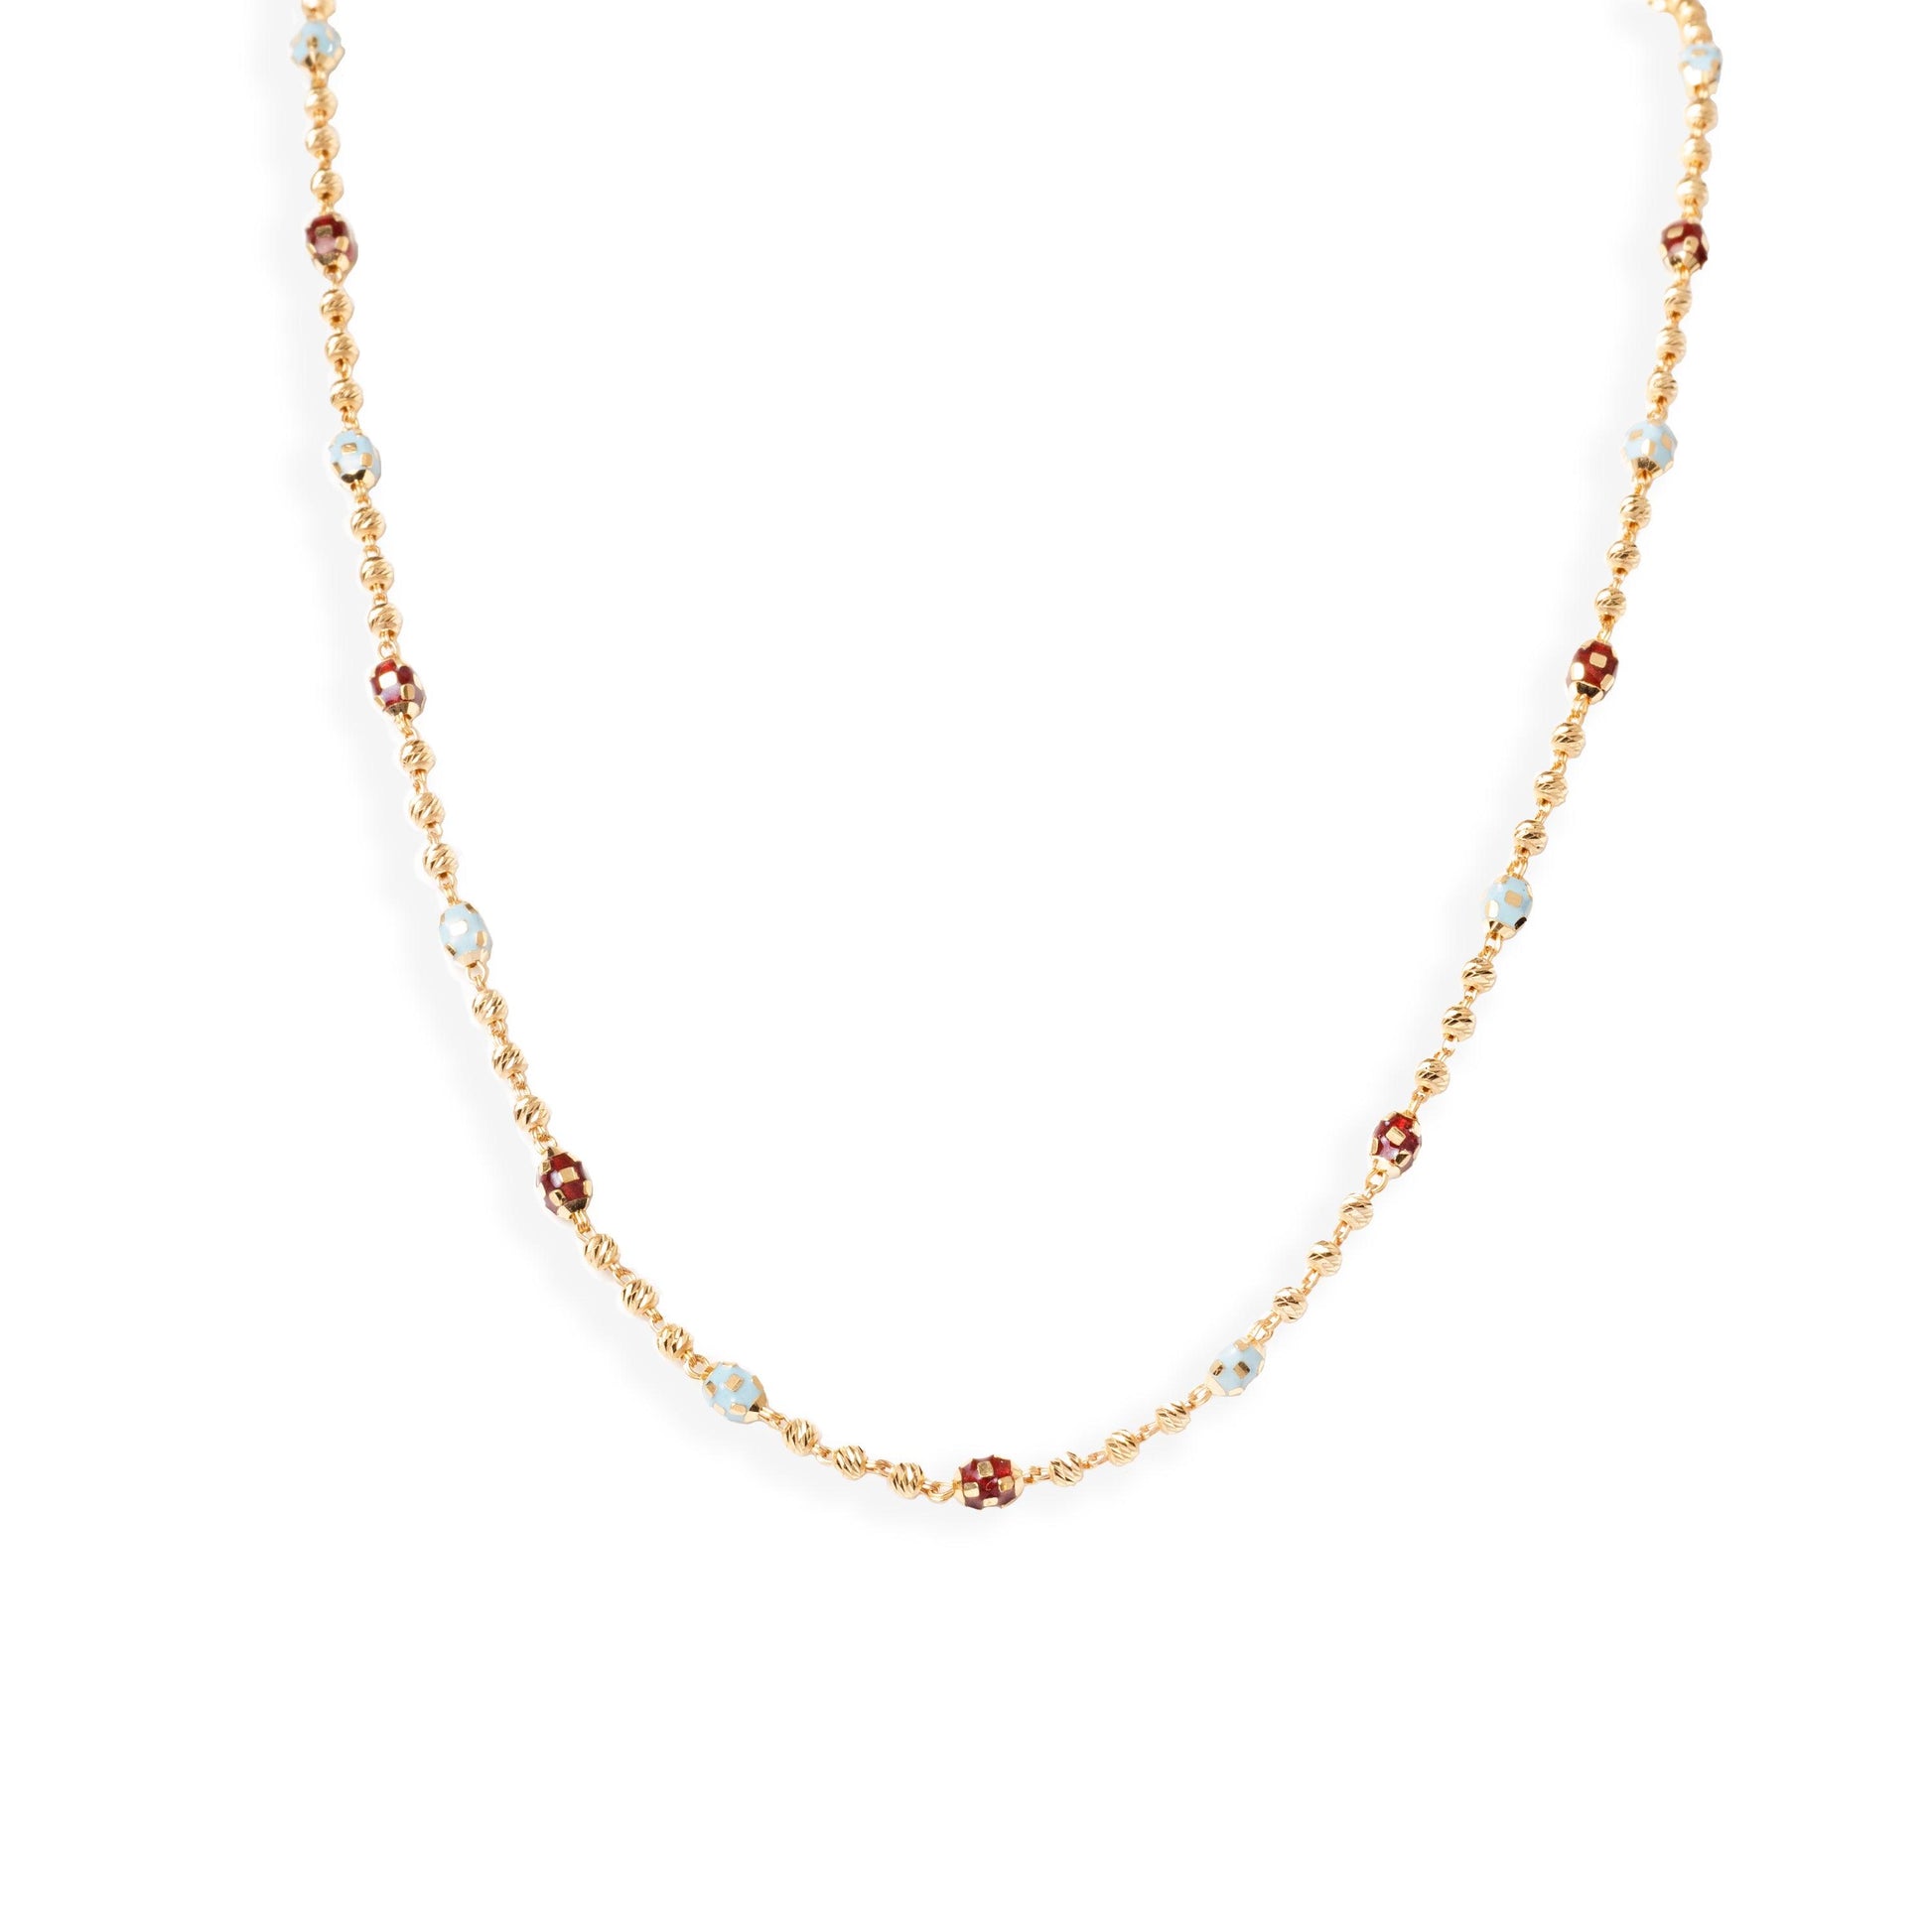 22ct Gold Beaded Necklace with Enamel Design and Hook Clasp (13.6g) C-7130 - Minar Jewellers